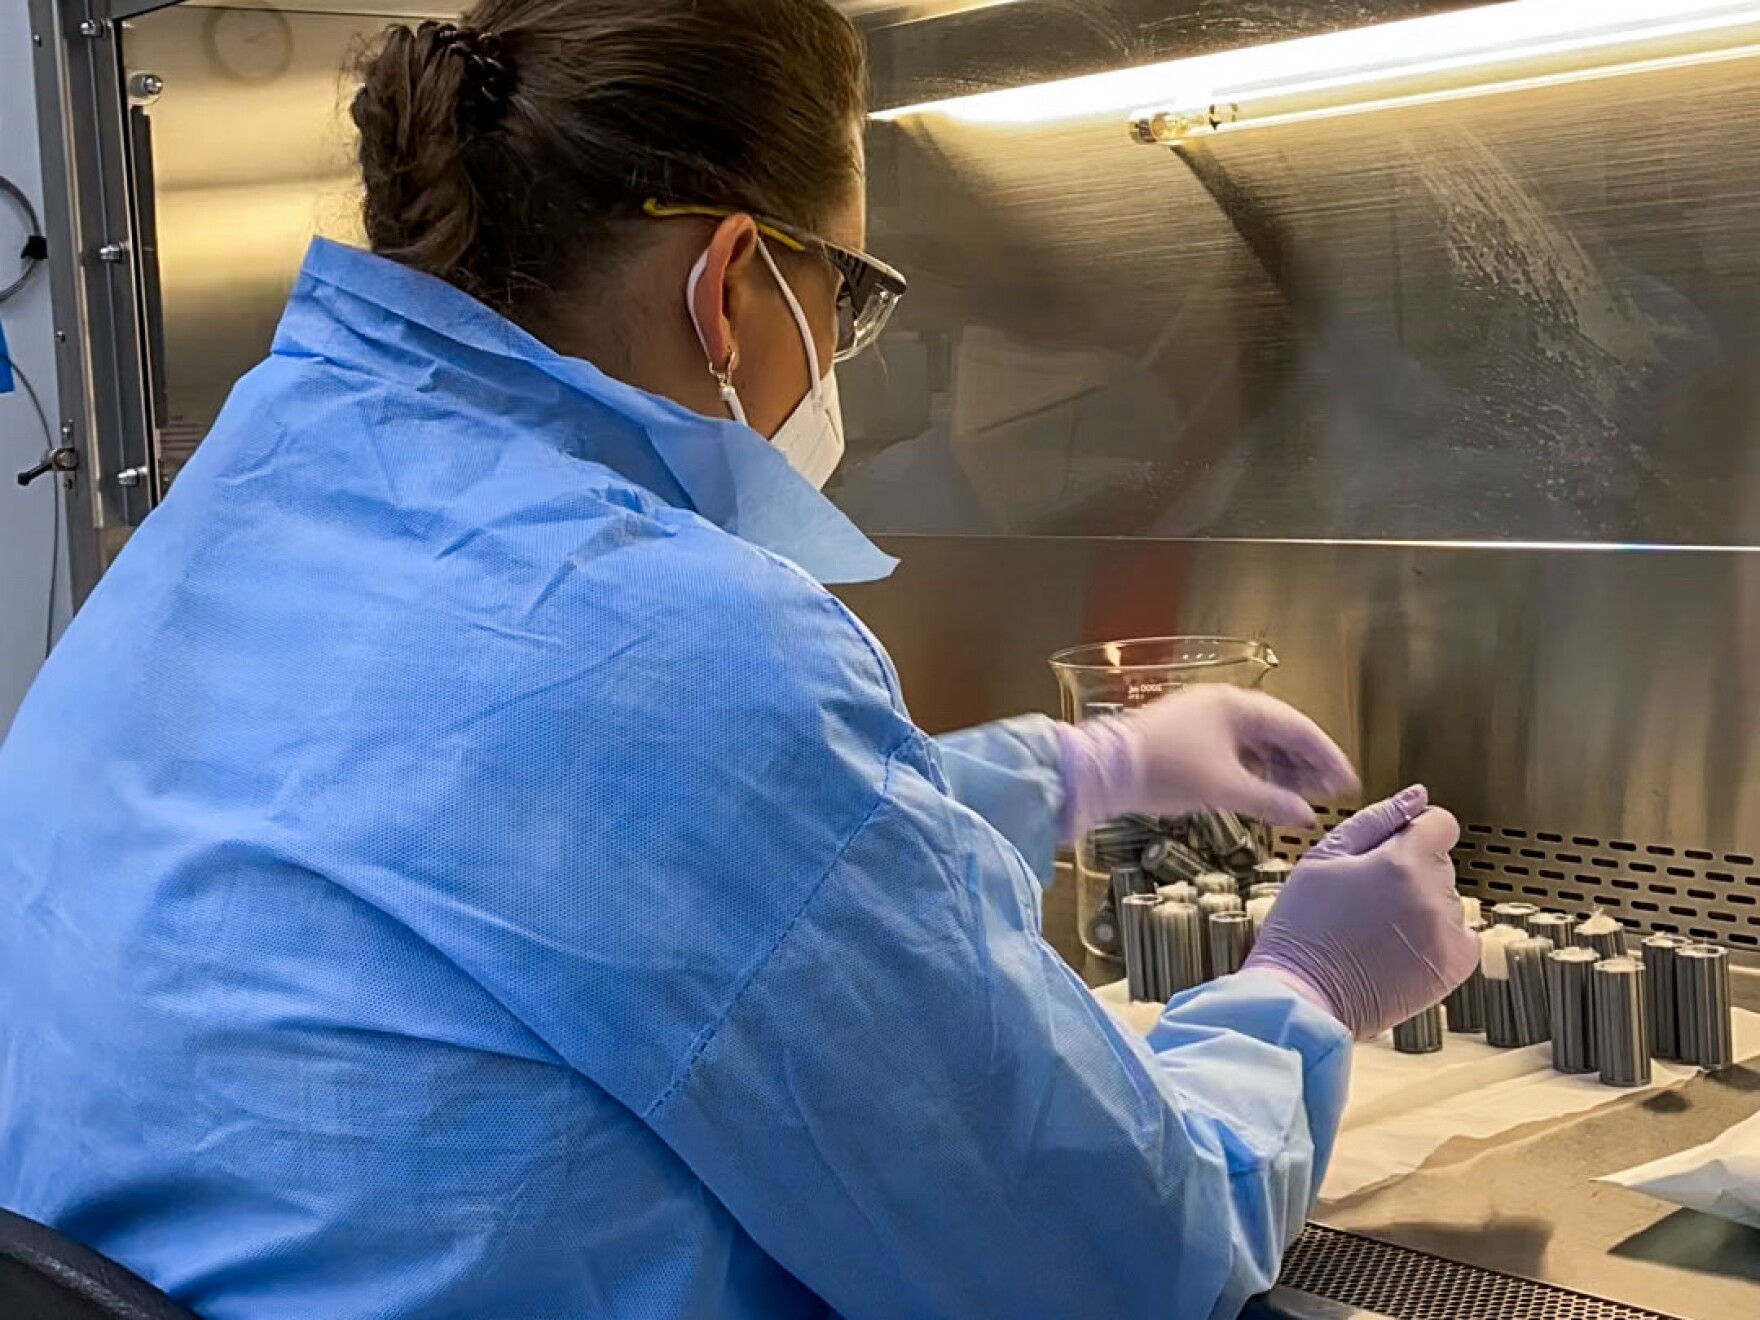 Pacific Northwest National Laboratory staff technician Yuliya Farris prepares sterile spaces used to hold soil in place for an experiment dubbed the Dynamics of the Microbiome in Space, known as DynaMoS. A SpaceX resupply mission will transport soil samples to the International Space Station, likely June 10.